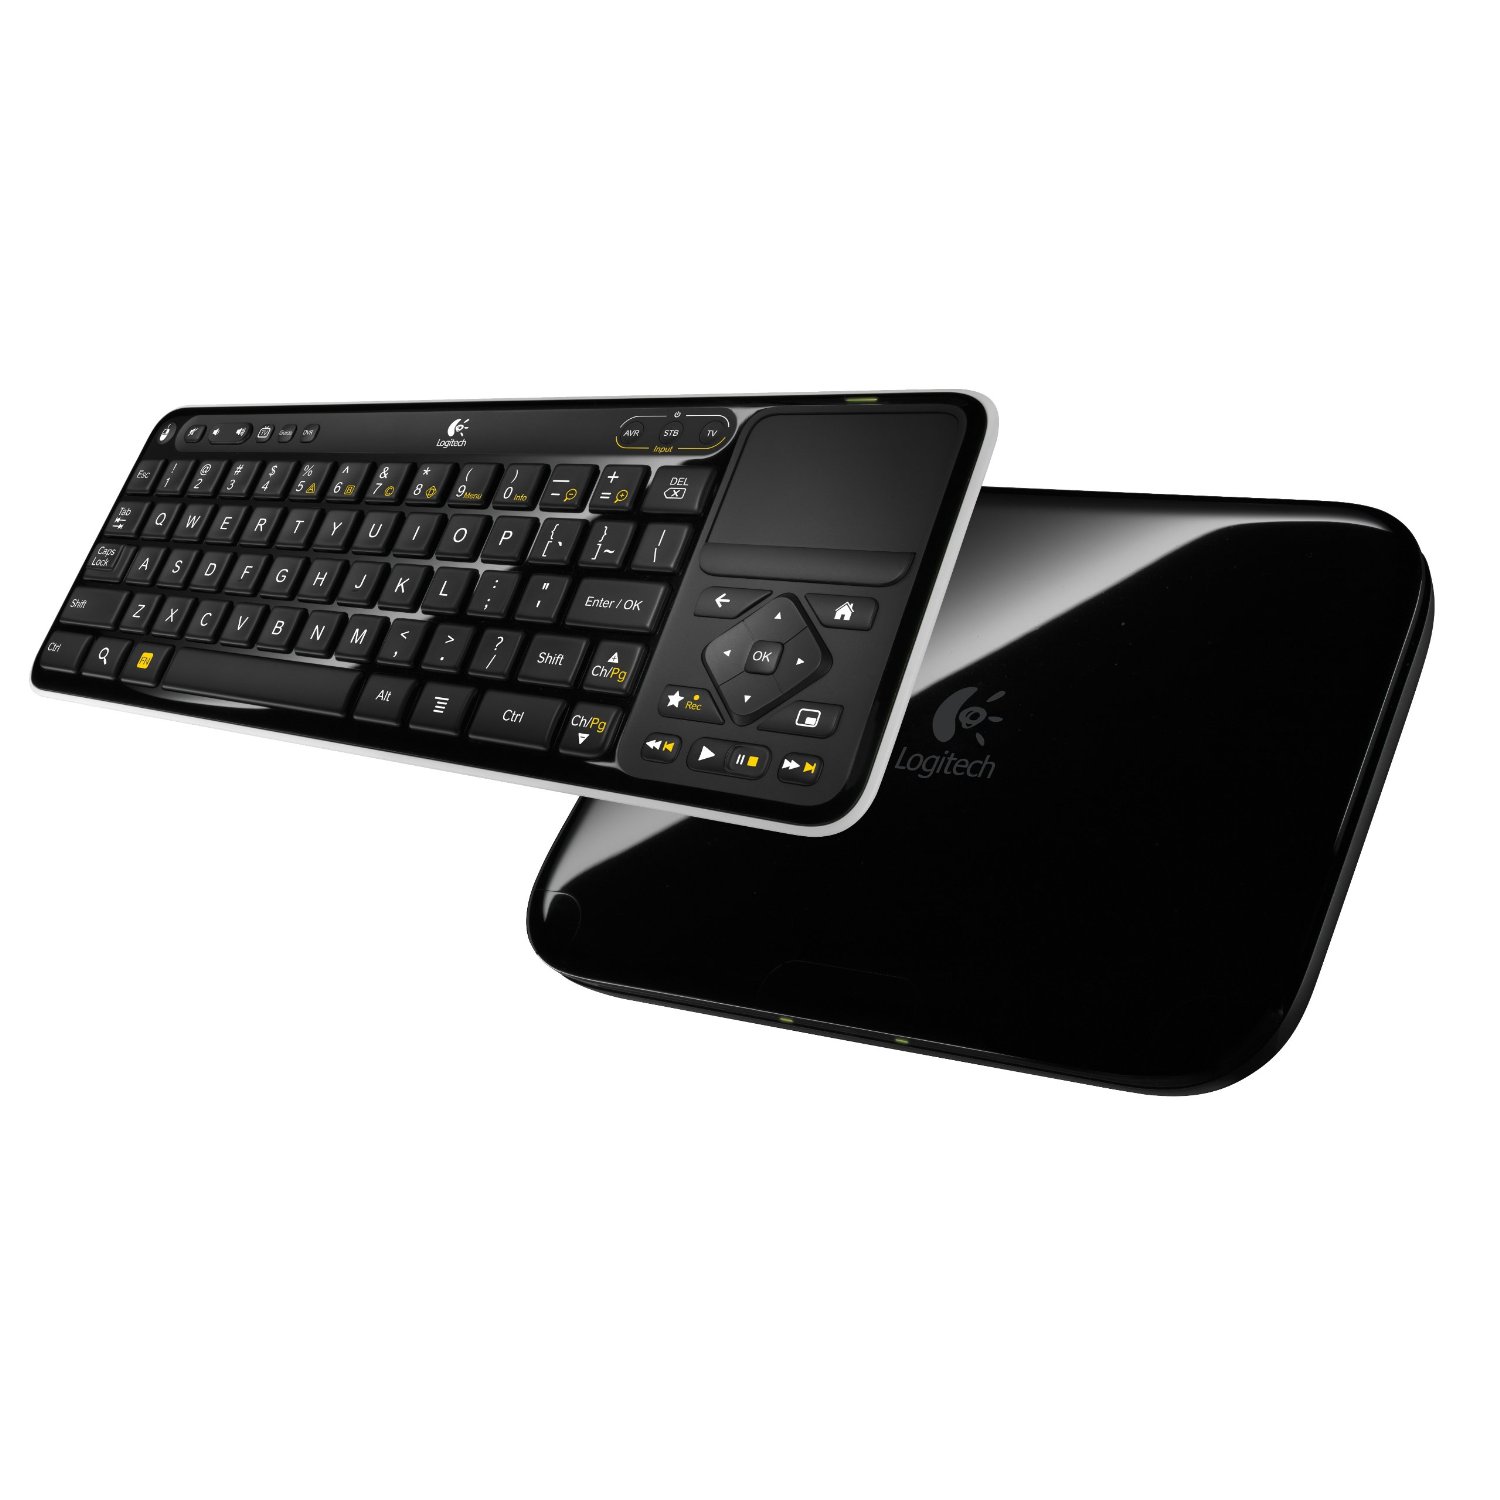 http://thetechjournal.com/wp-content/uploads/images/1109/1316496455-logitech-revue-companion-box-with-google-tv-and-keyboard-controller-1.jpg